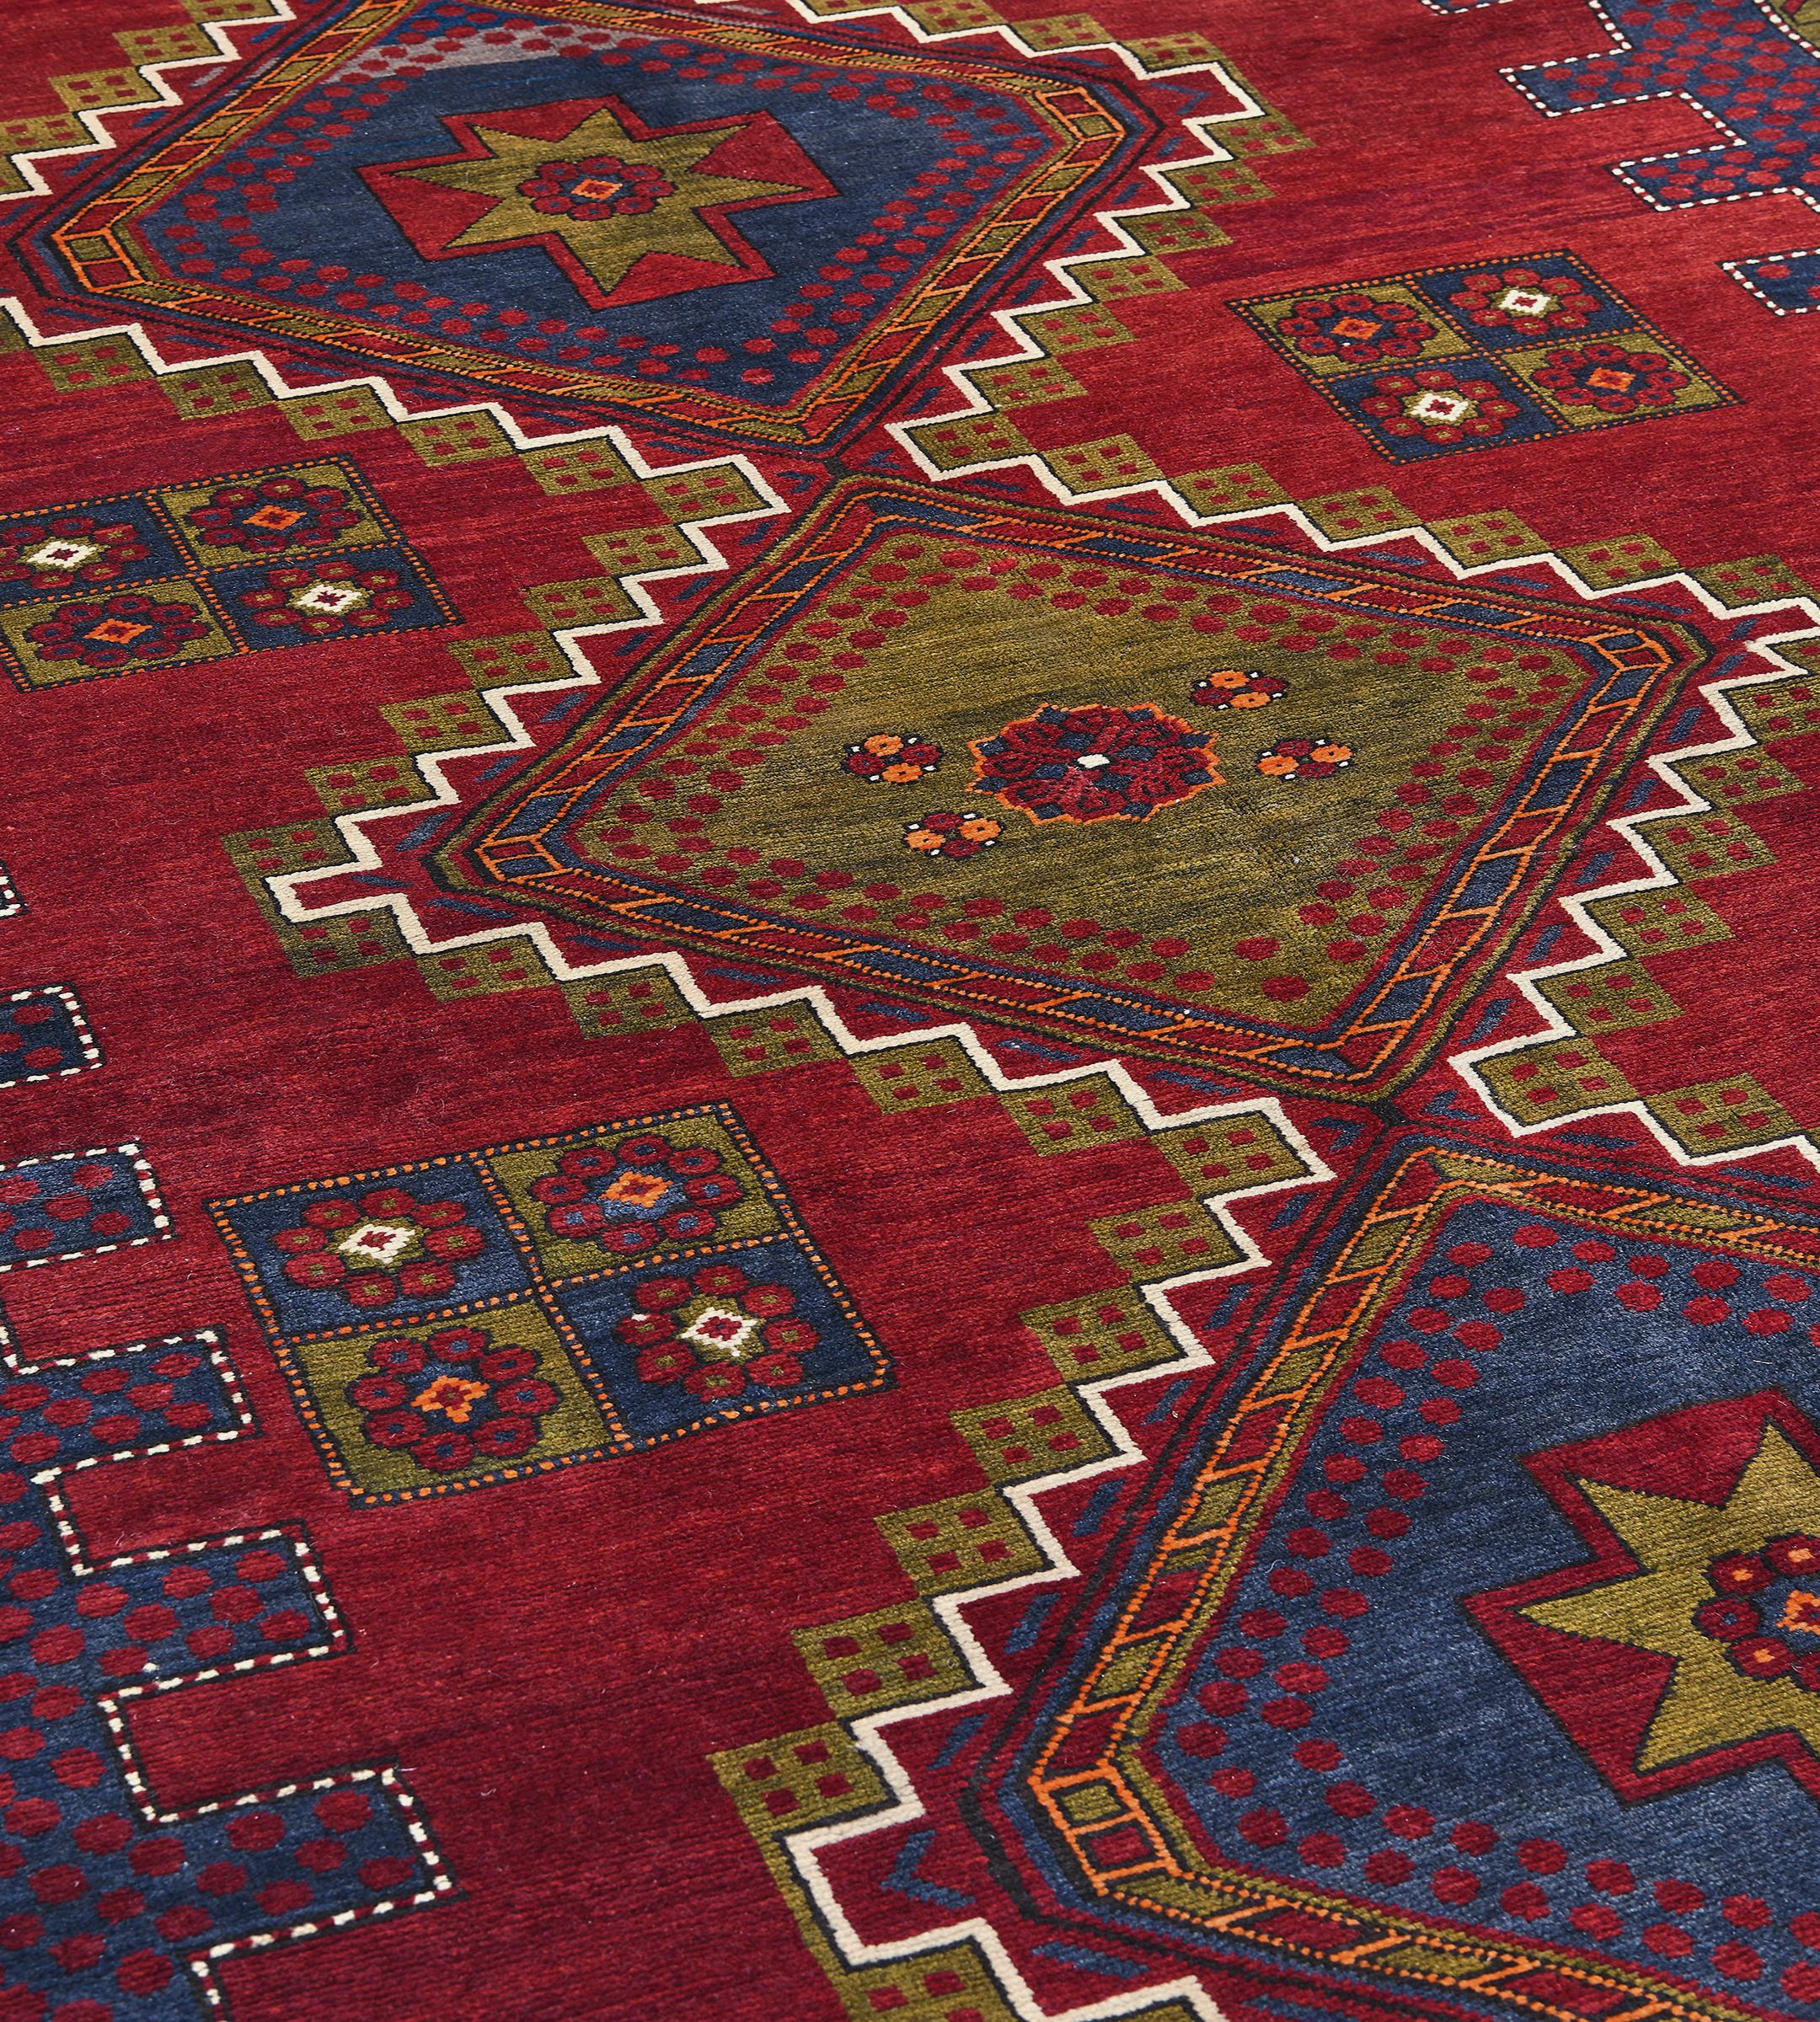 This traditional handwoven Caucasian Shirvan rug has an attractive shaded ruby field counterposed with sparse delicate flowerhead motif, enclosing complementary stepped indigo and chartreuse triple medallions, in unusual polychrome striped and polka